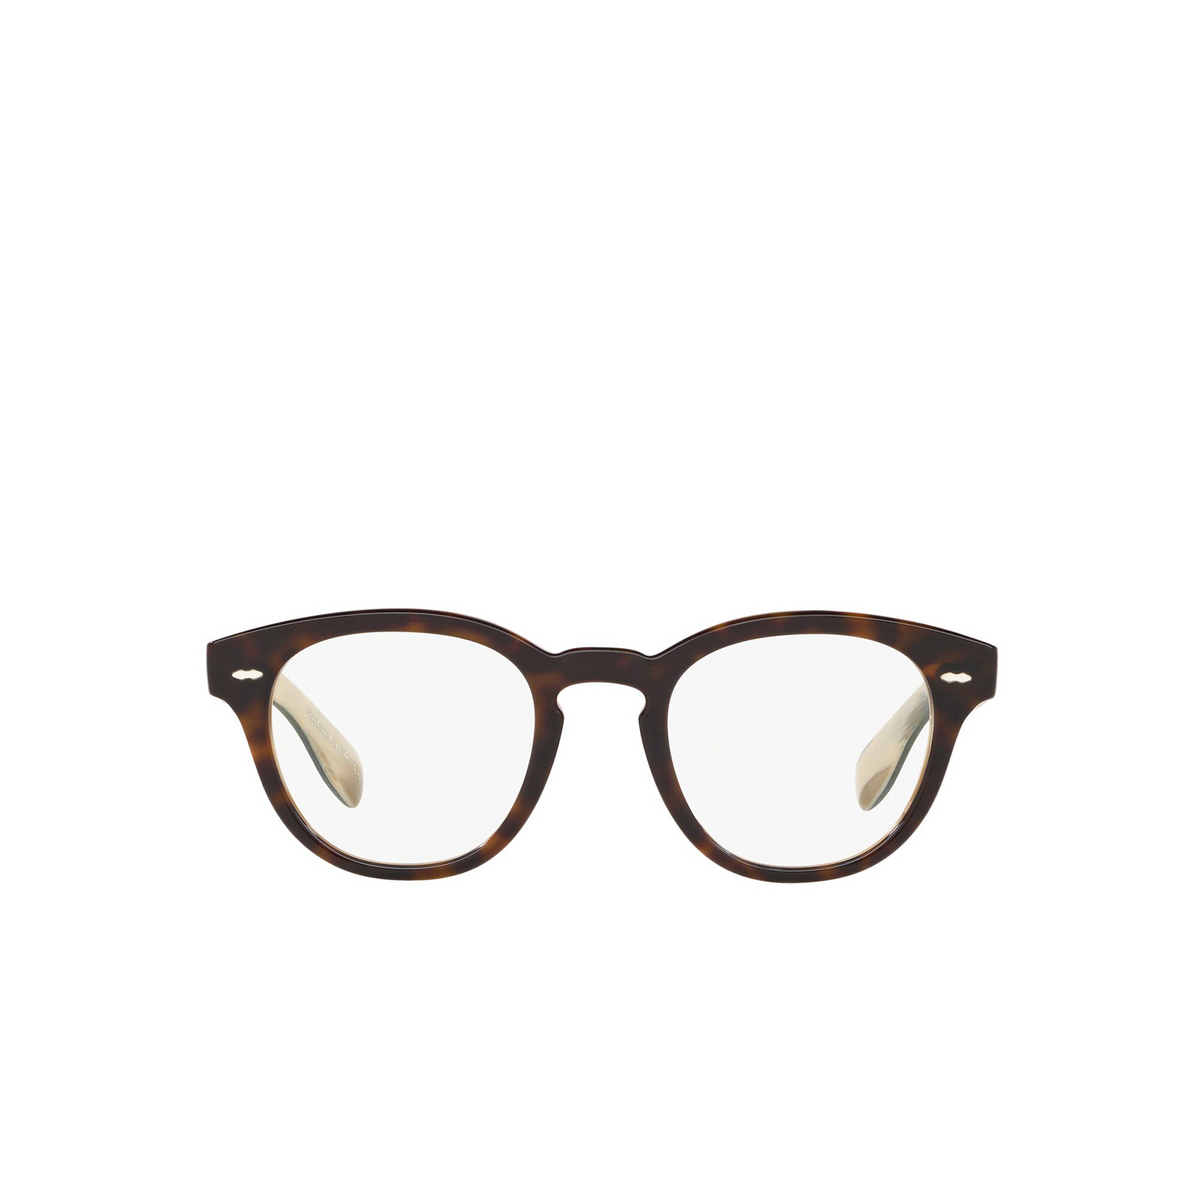 Oliver Peoples CARY GRANT Eyeglasses 1666 362 / Horn - front view